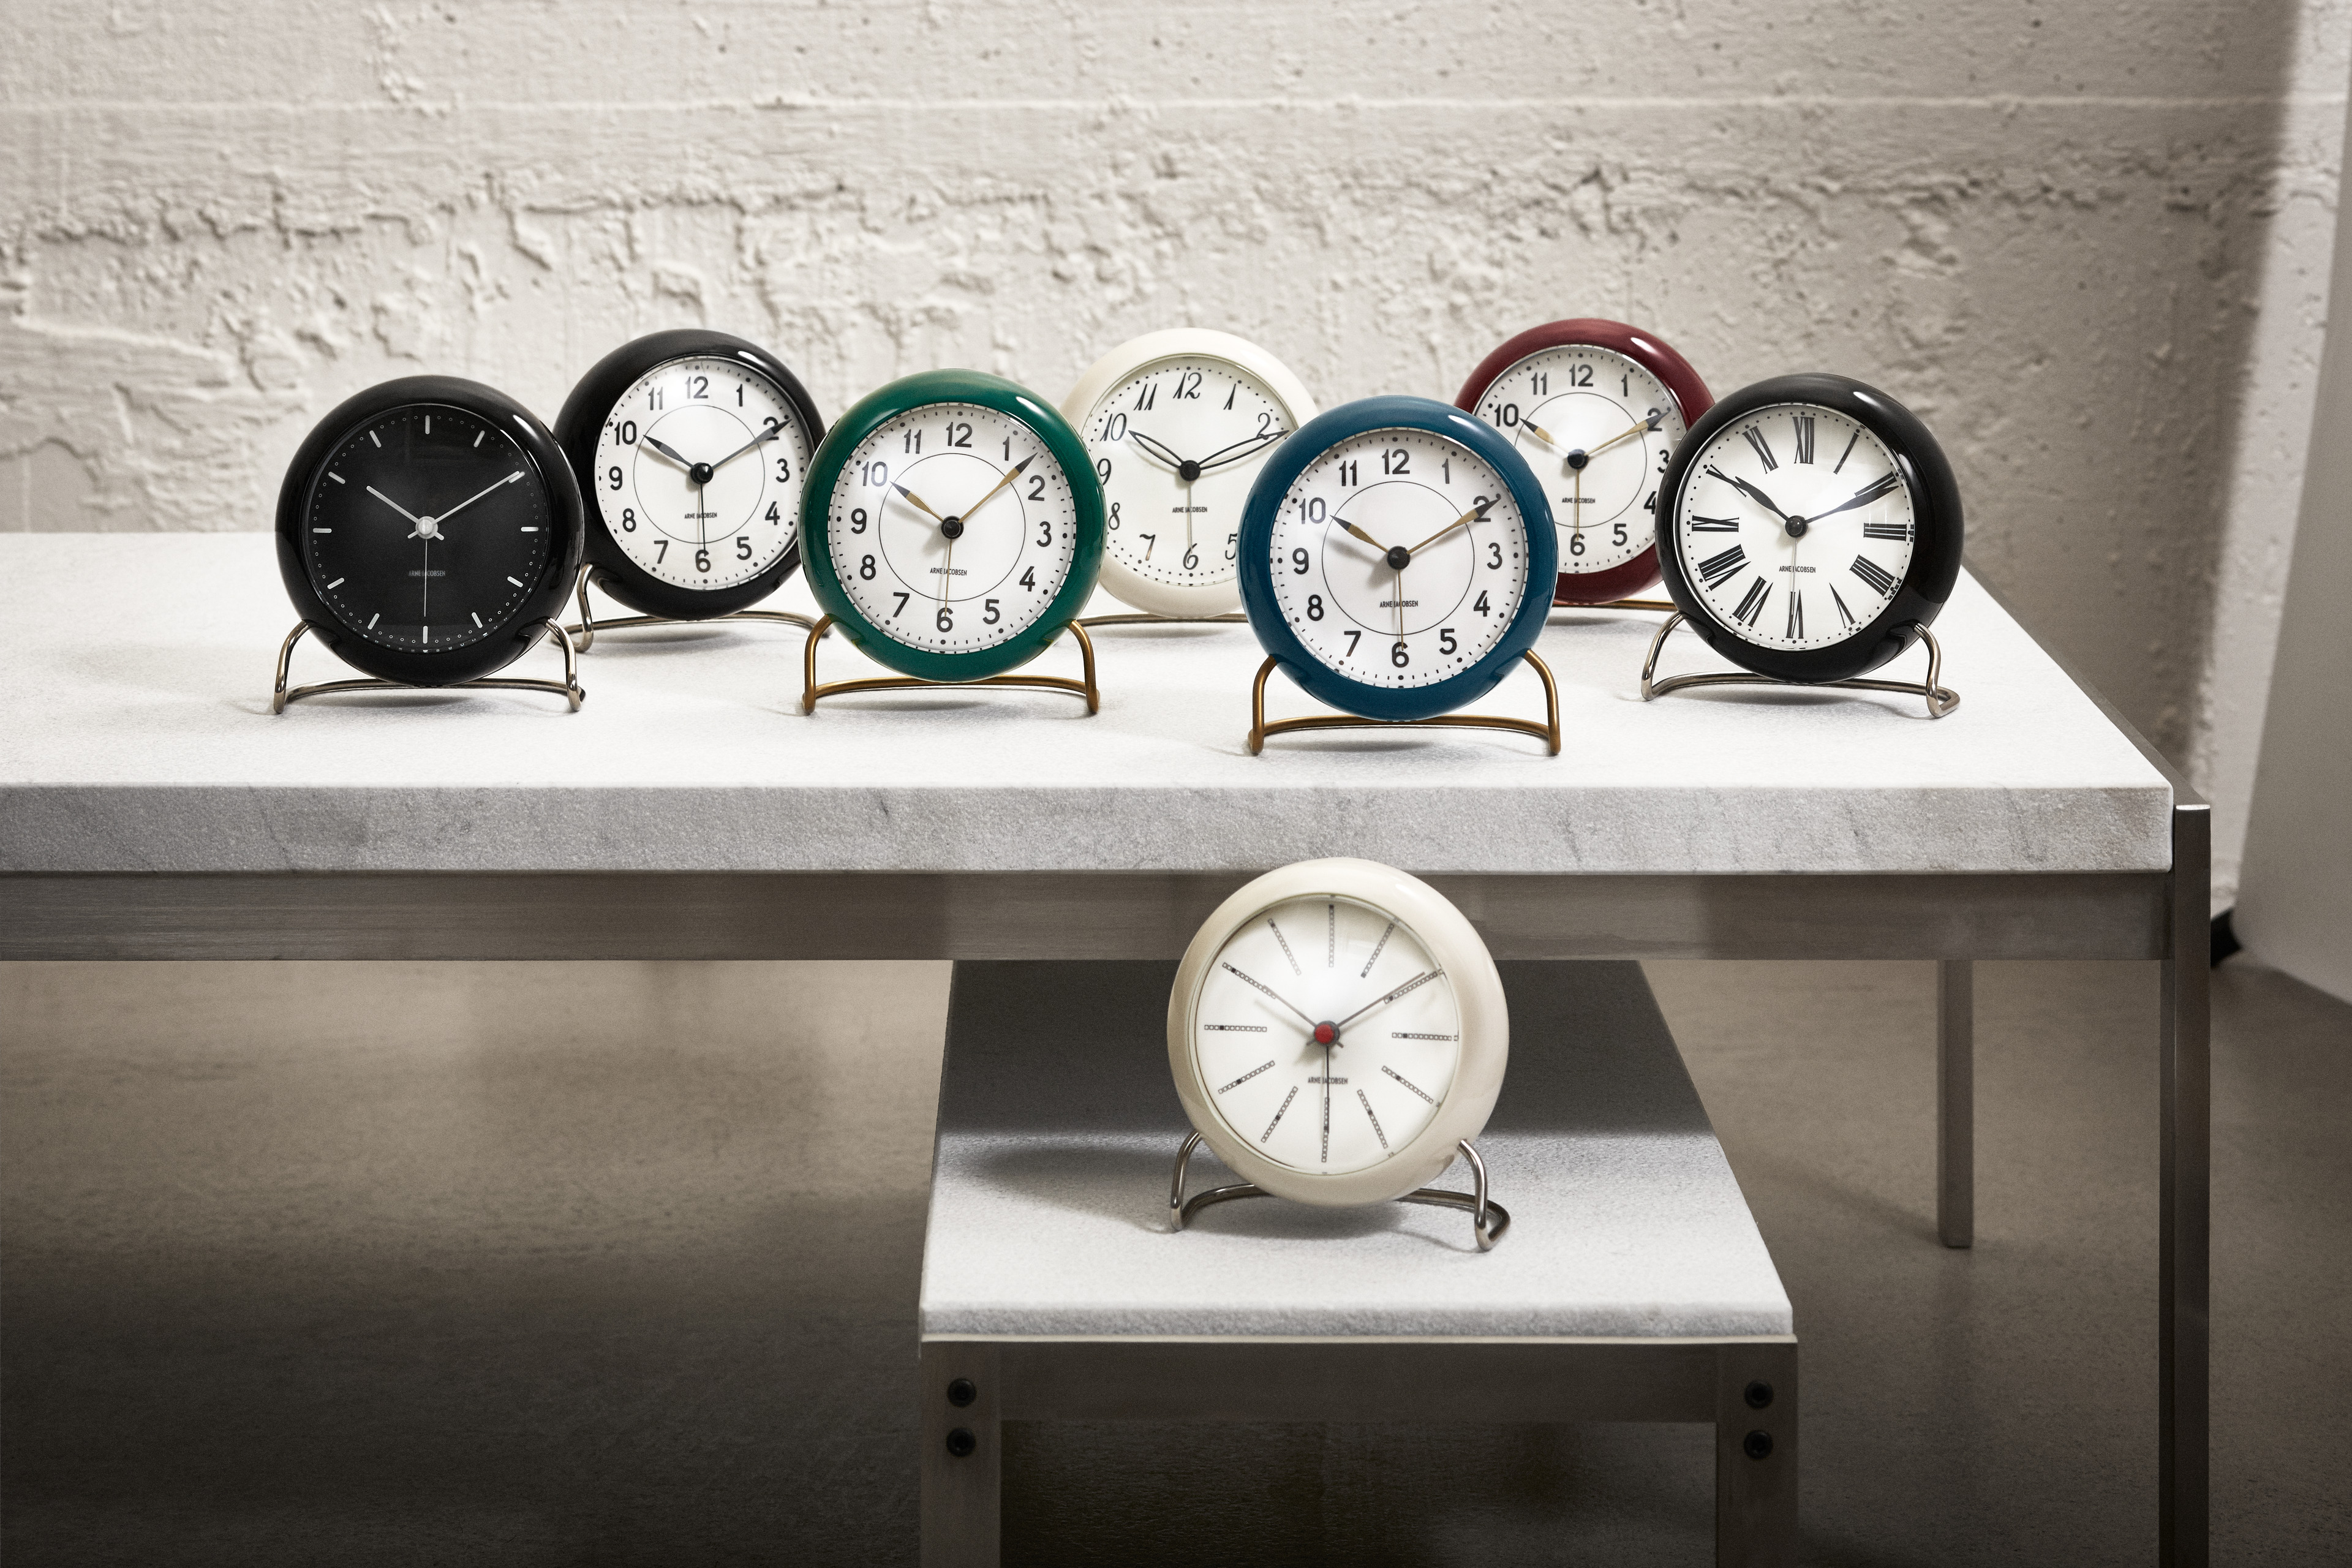 Table clocks by Arne Jacobsen Clocks in different colours on the table